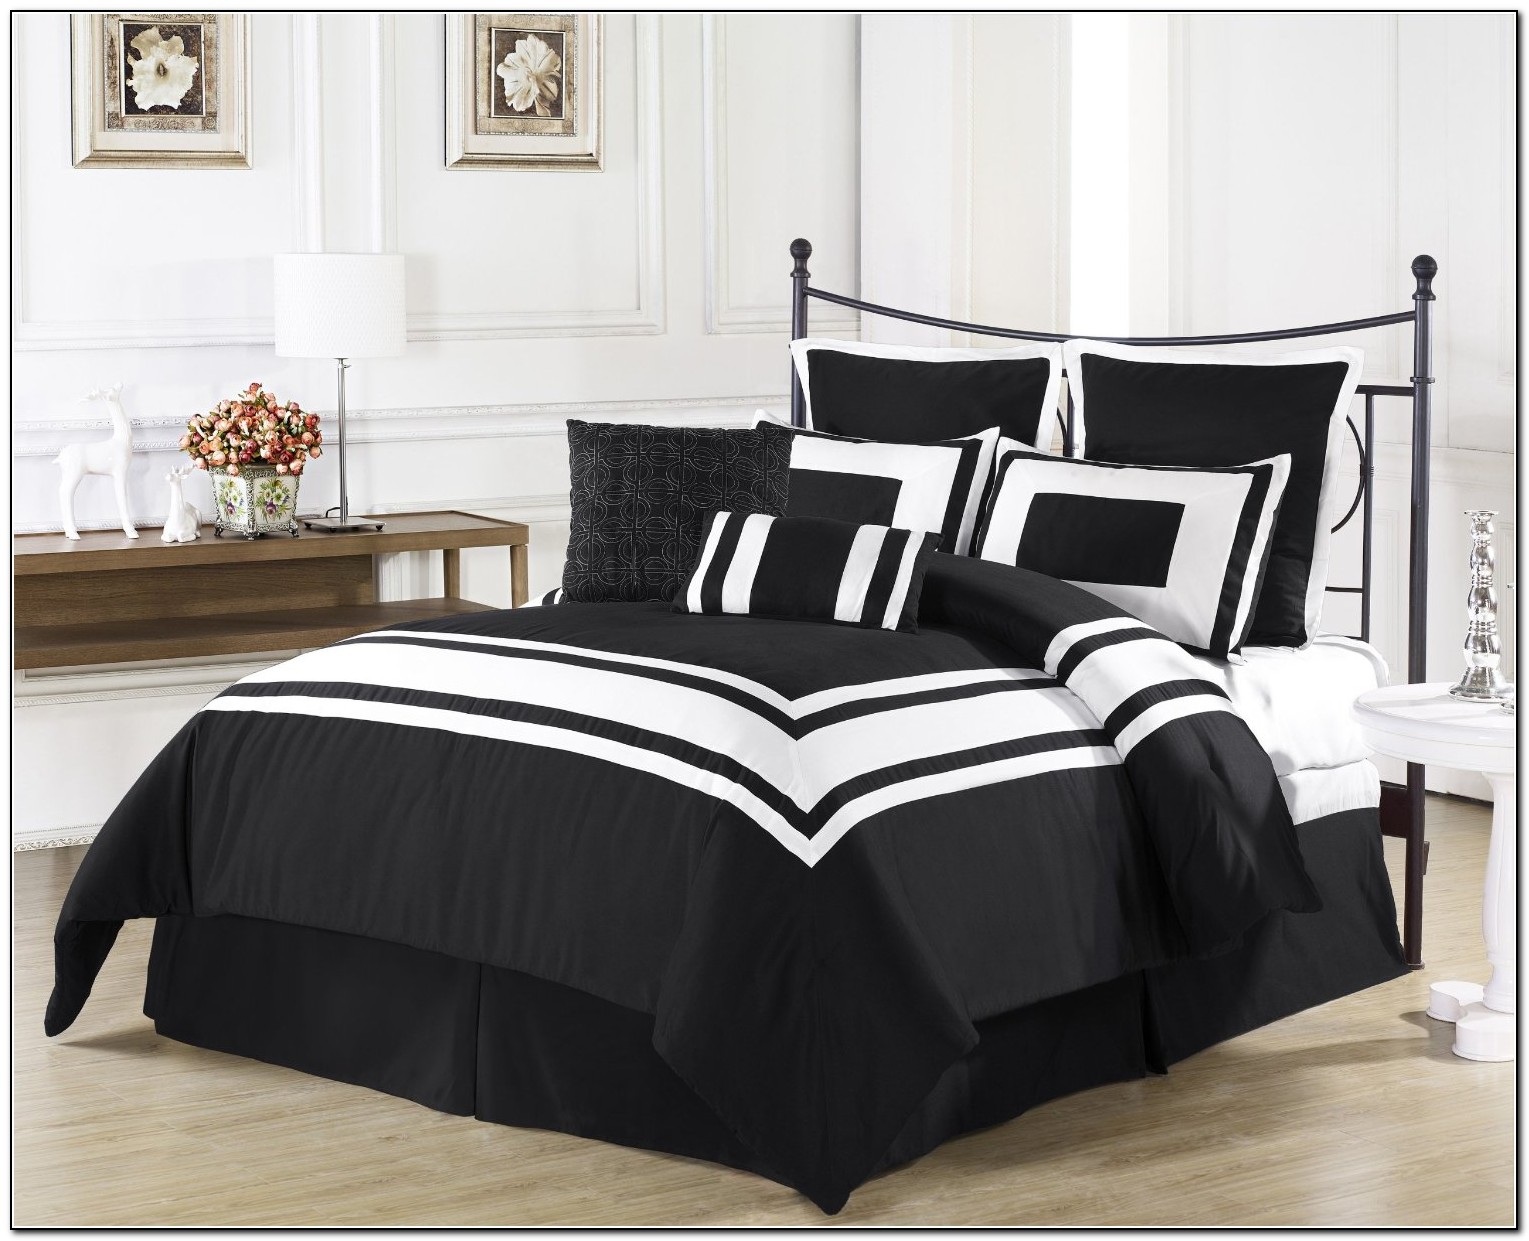 Black And White Bedding Sets